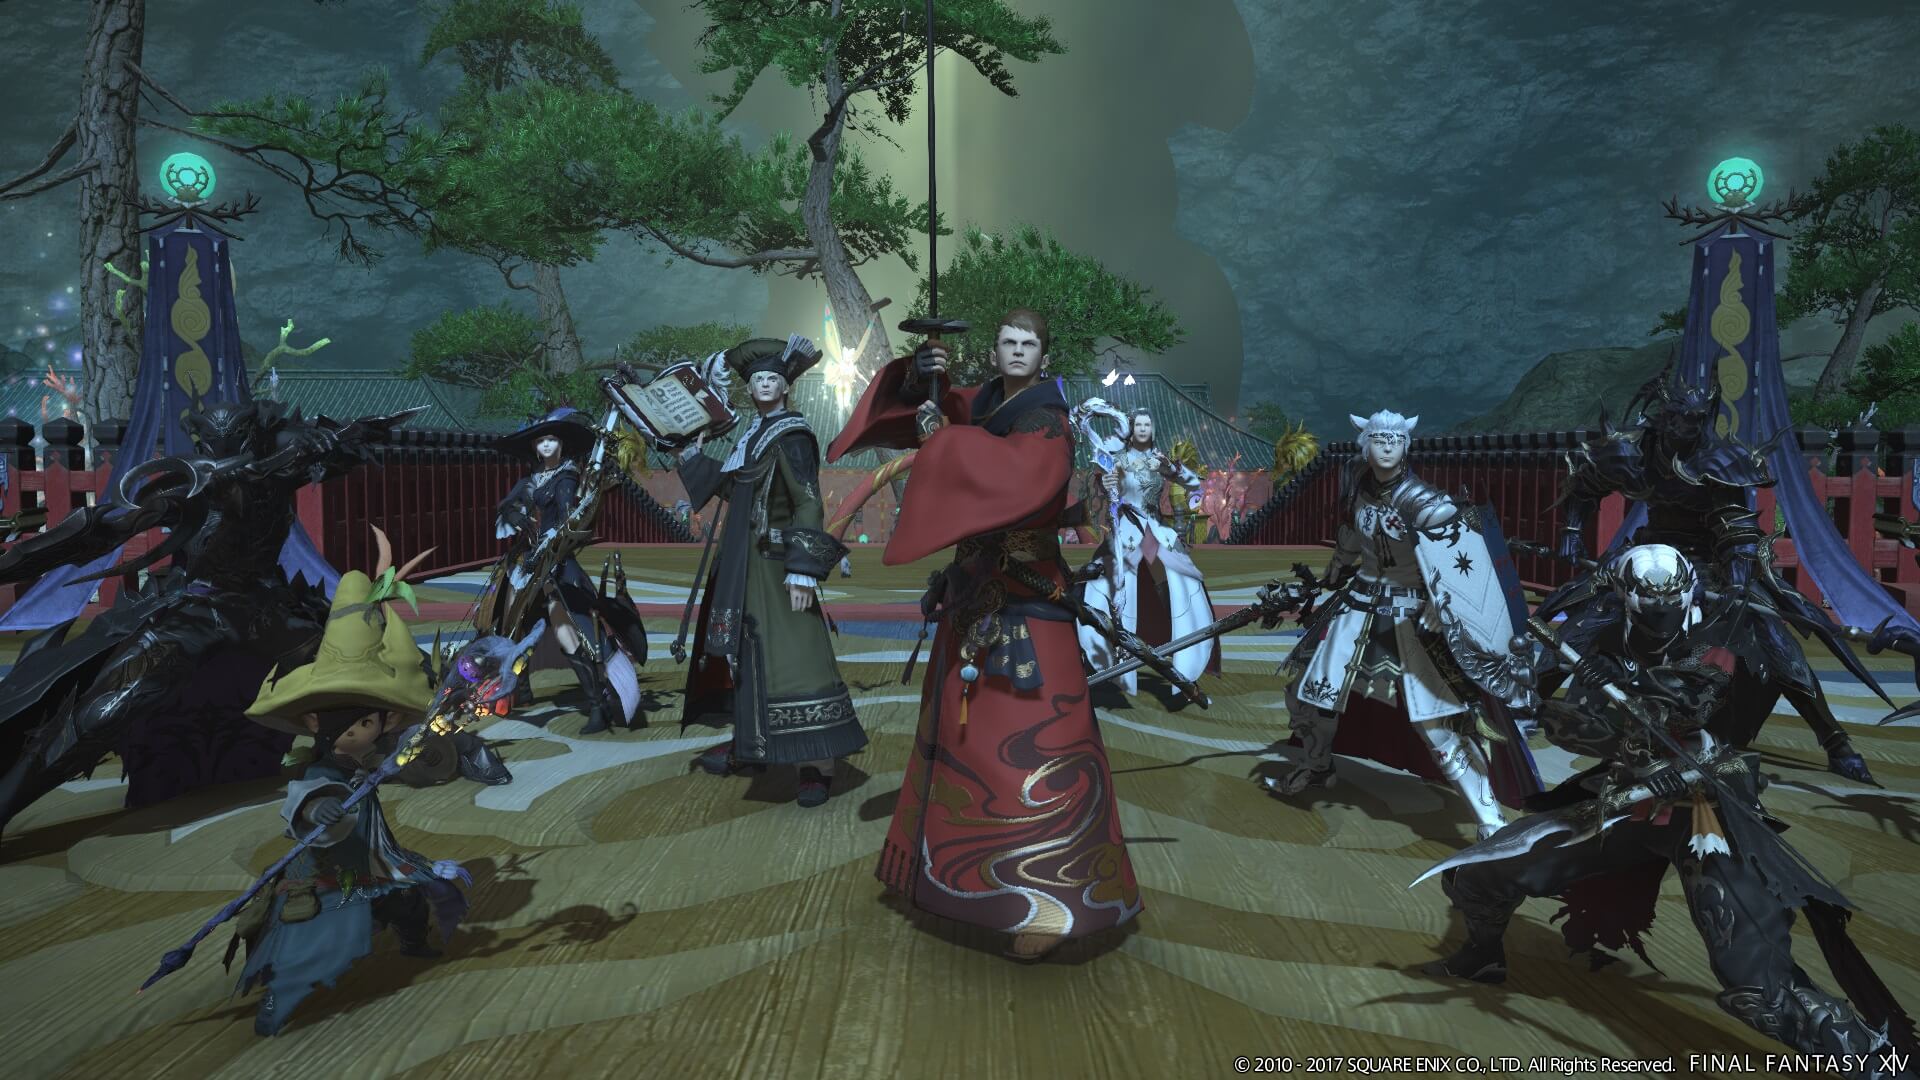 Final Fantasy Xiv Online Complete Edition Review Bonus Stage Over 5300 Video Game Reviews